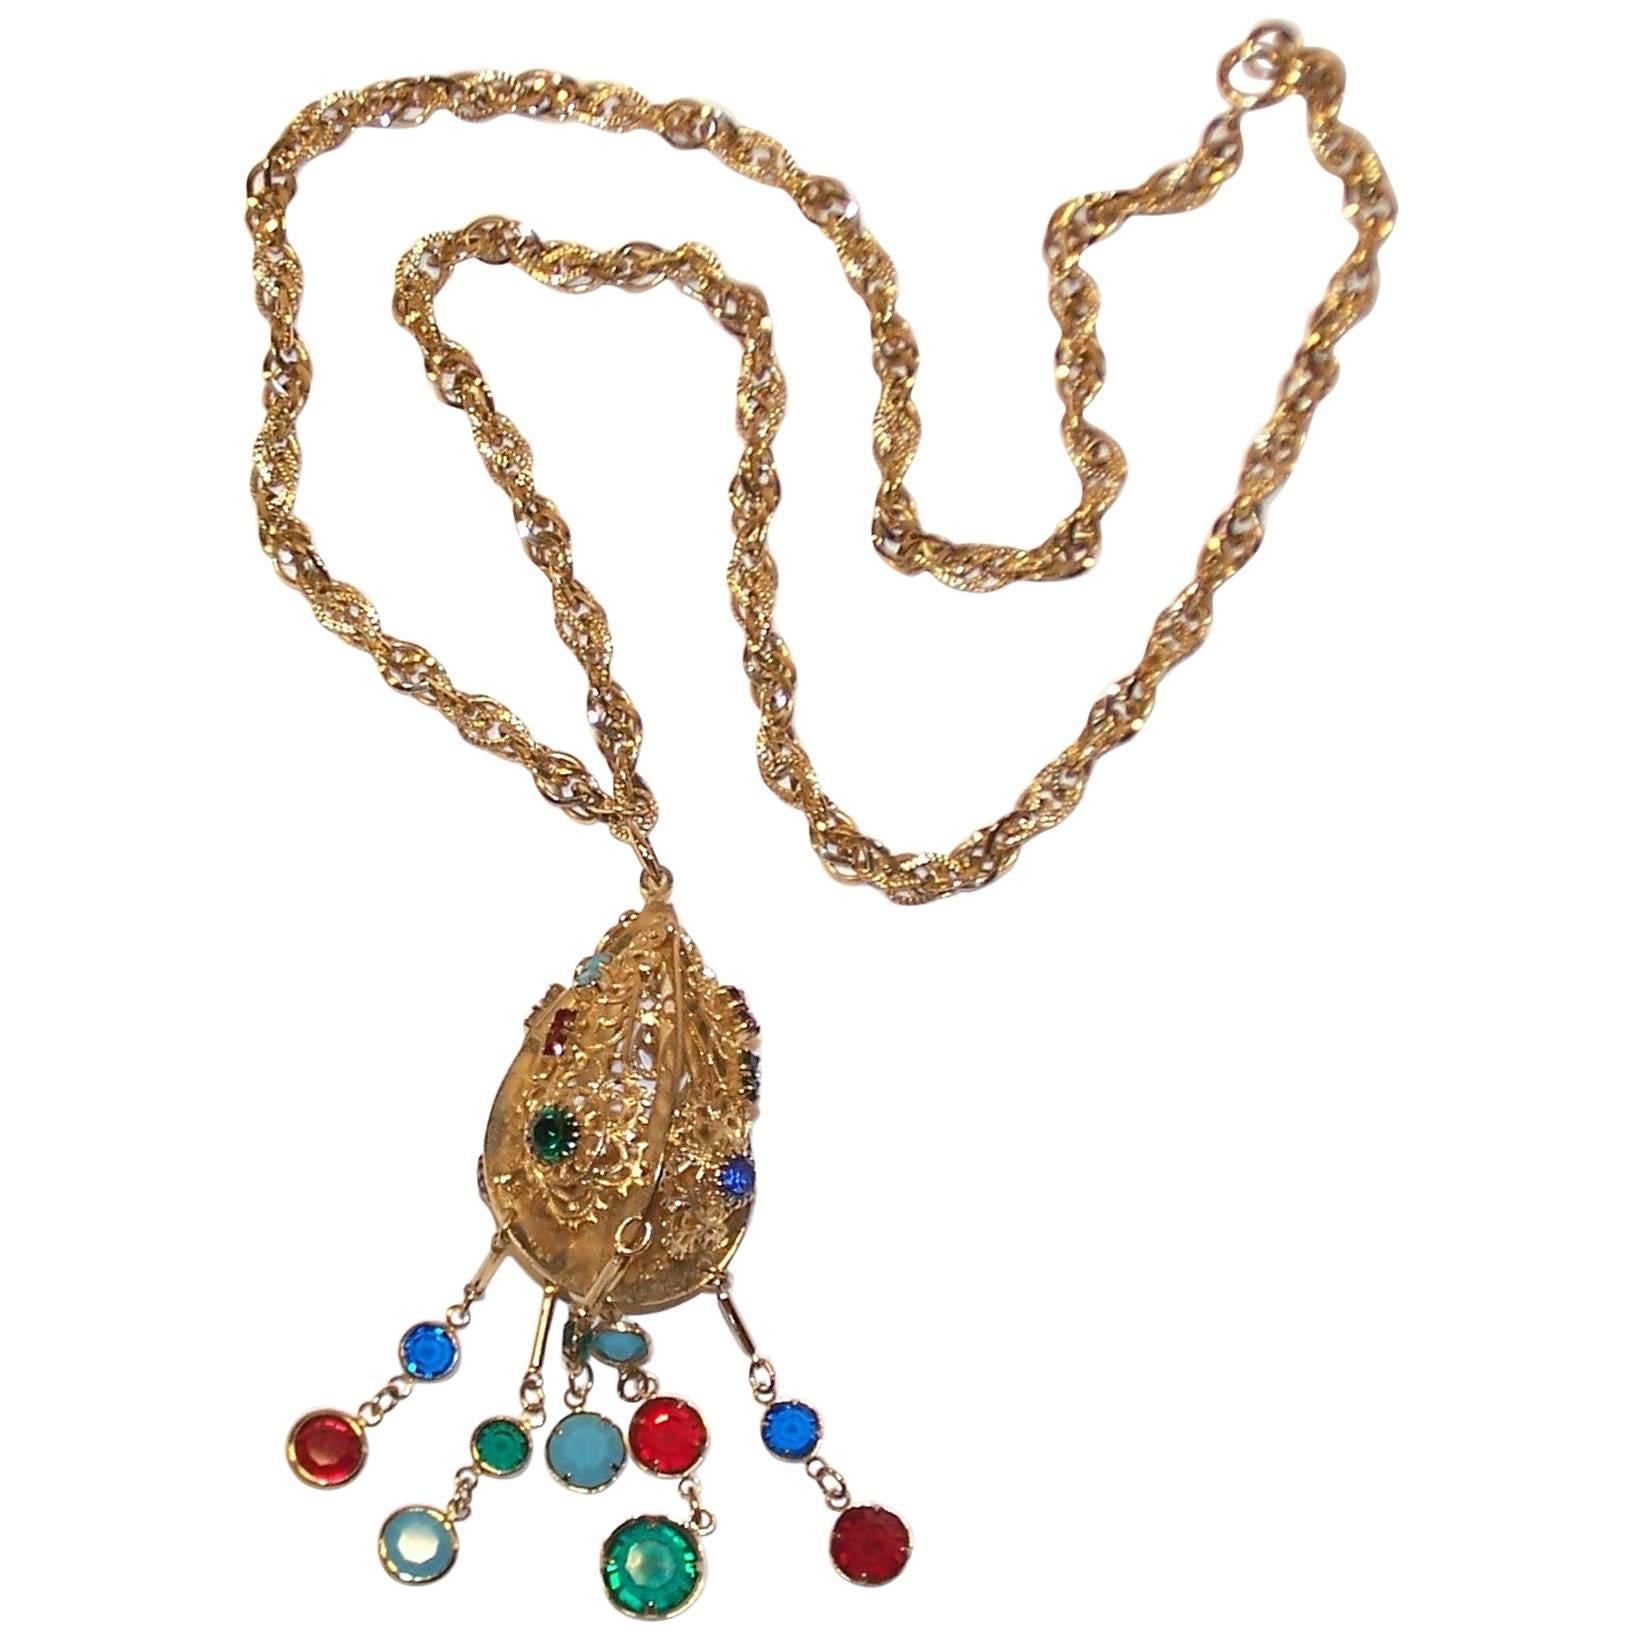 Colorful C.1970 Bejeweled Pendant with Gold Metal Rope Chain